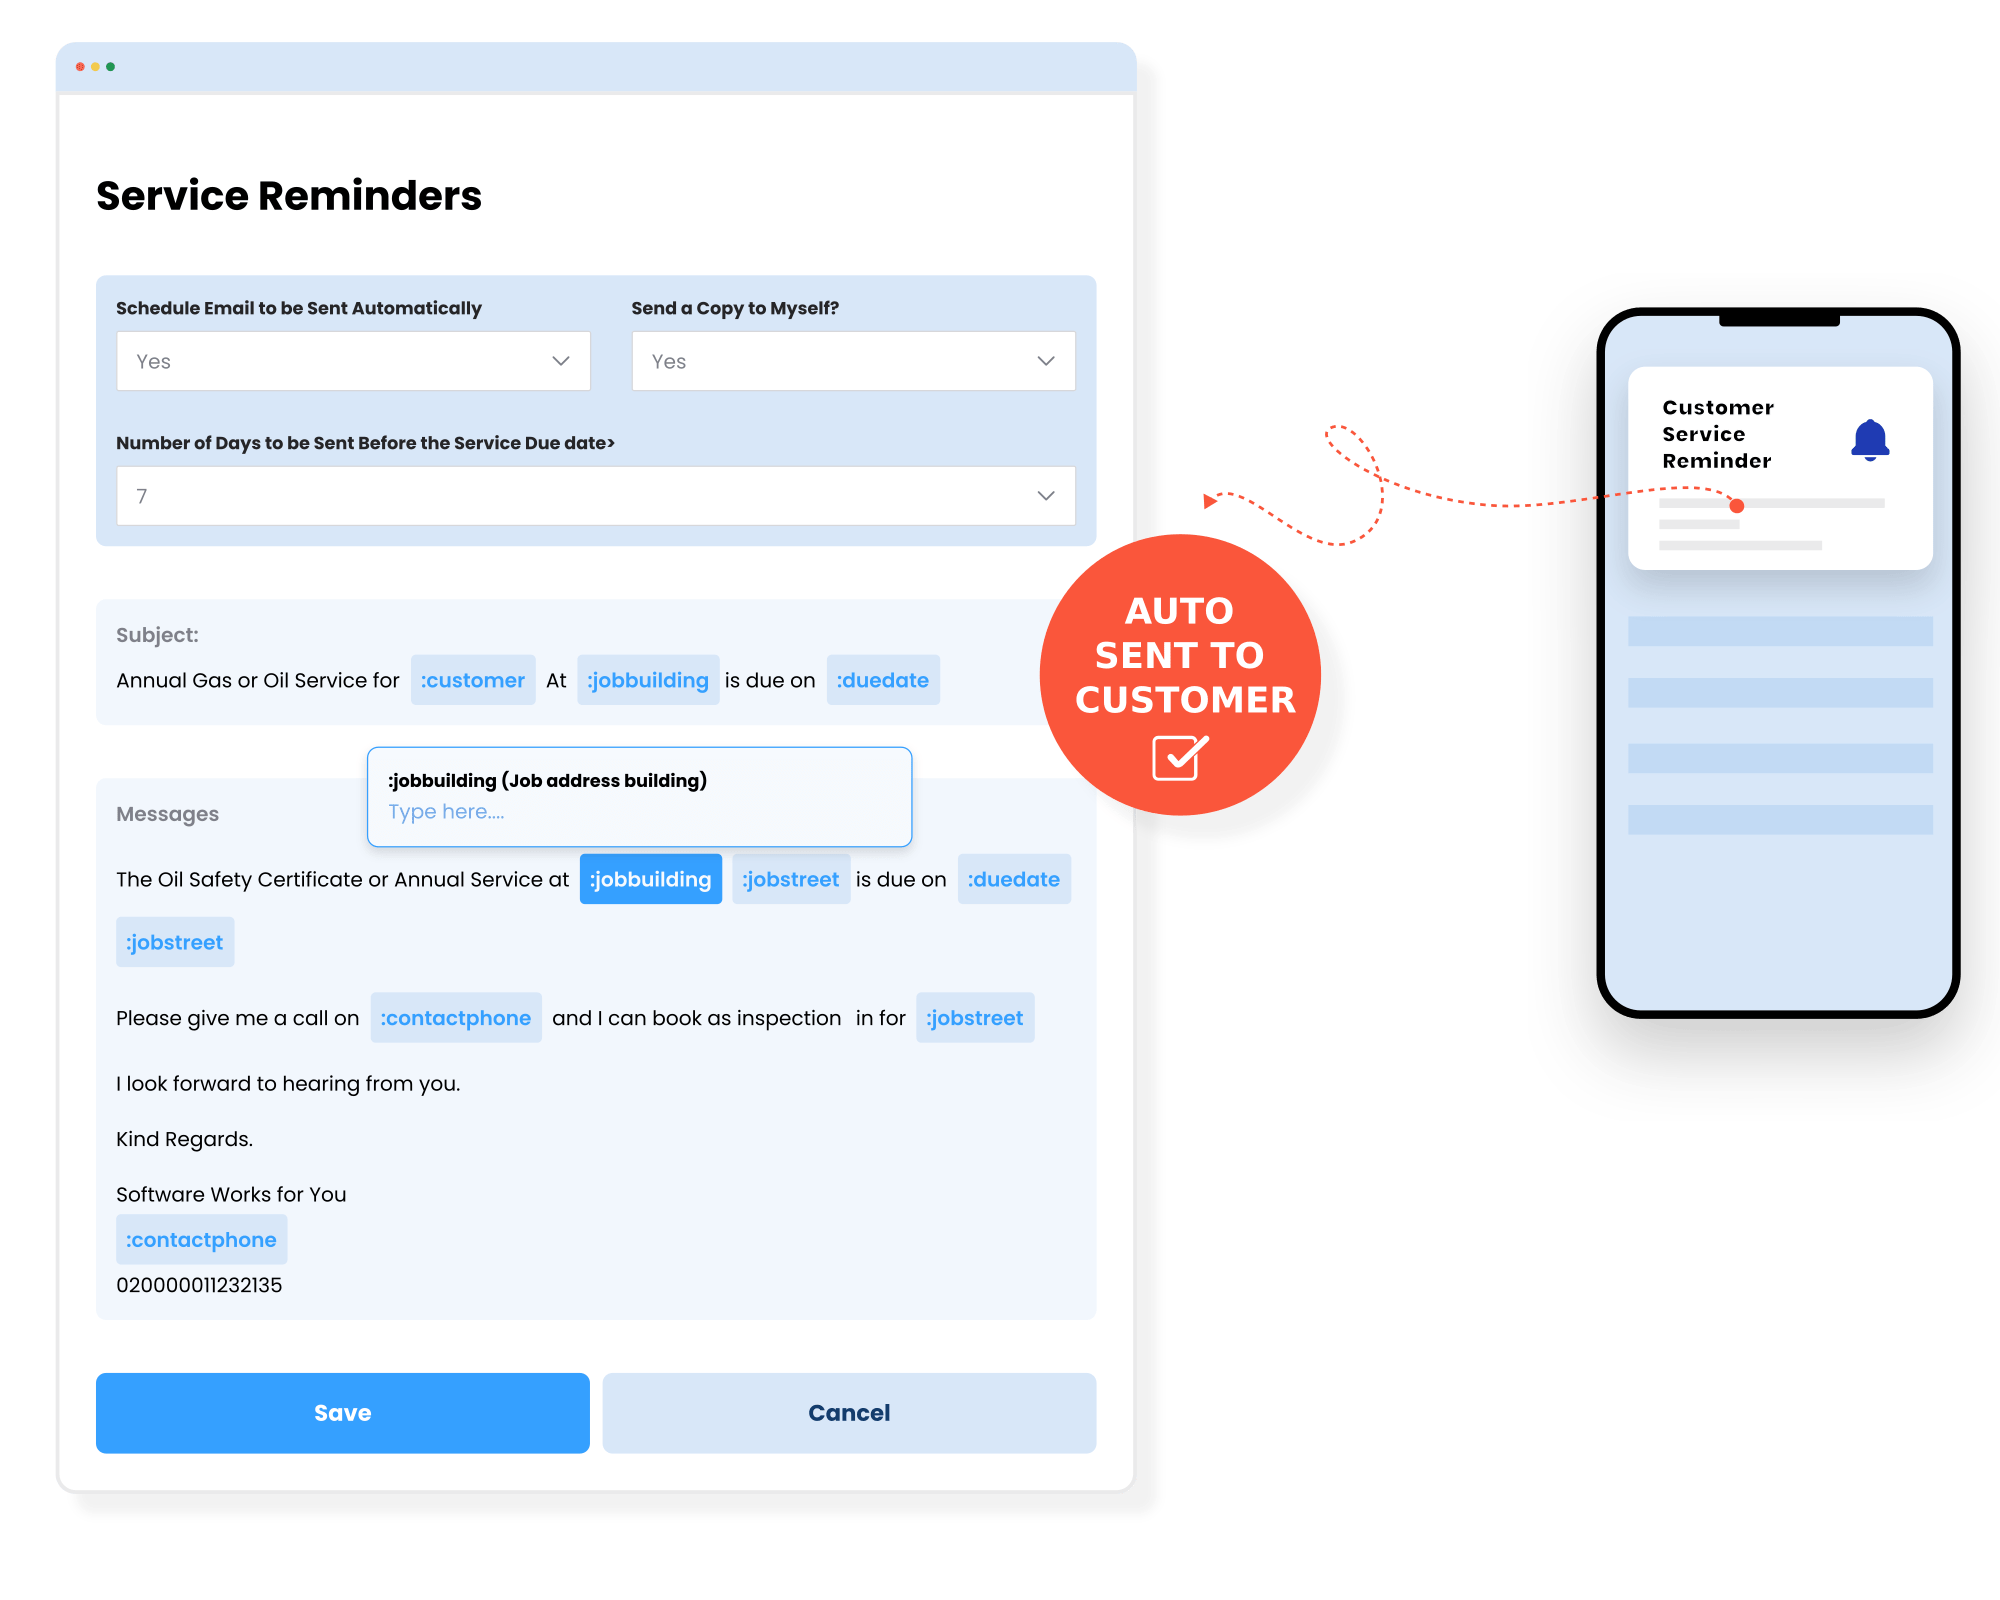 Customisable automated reminders that will help you get more business